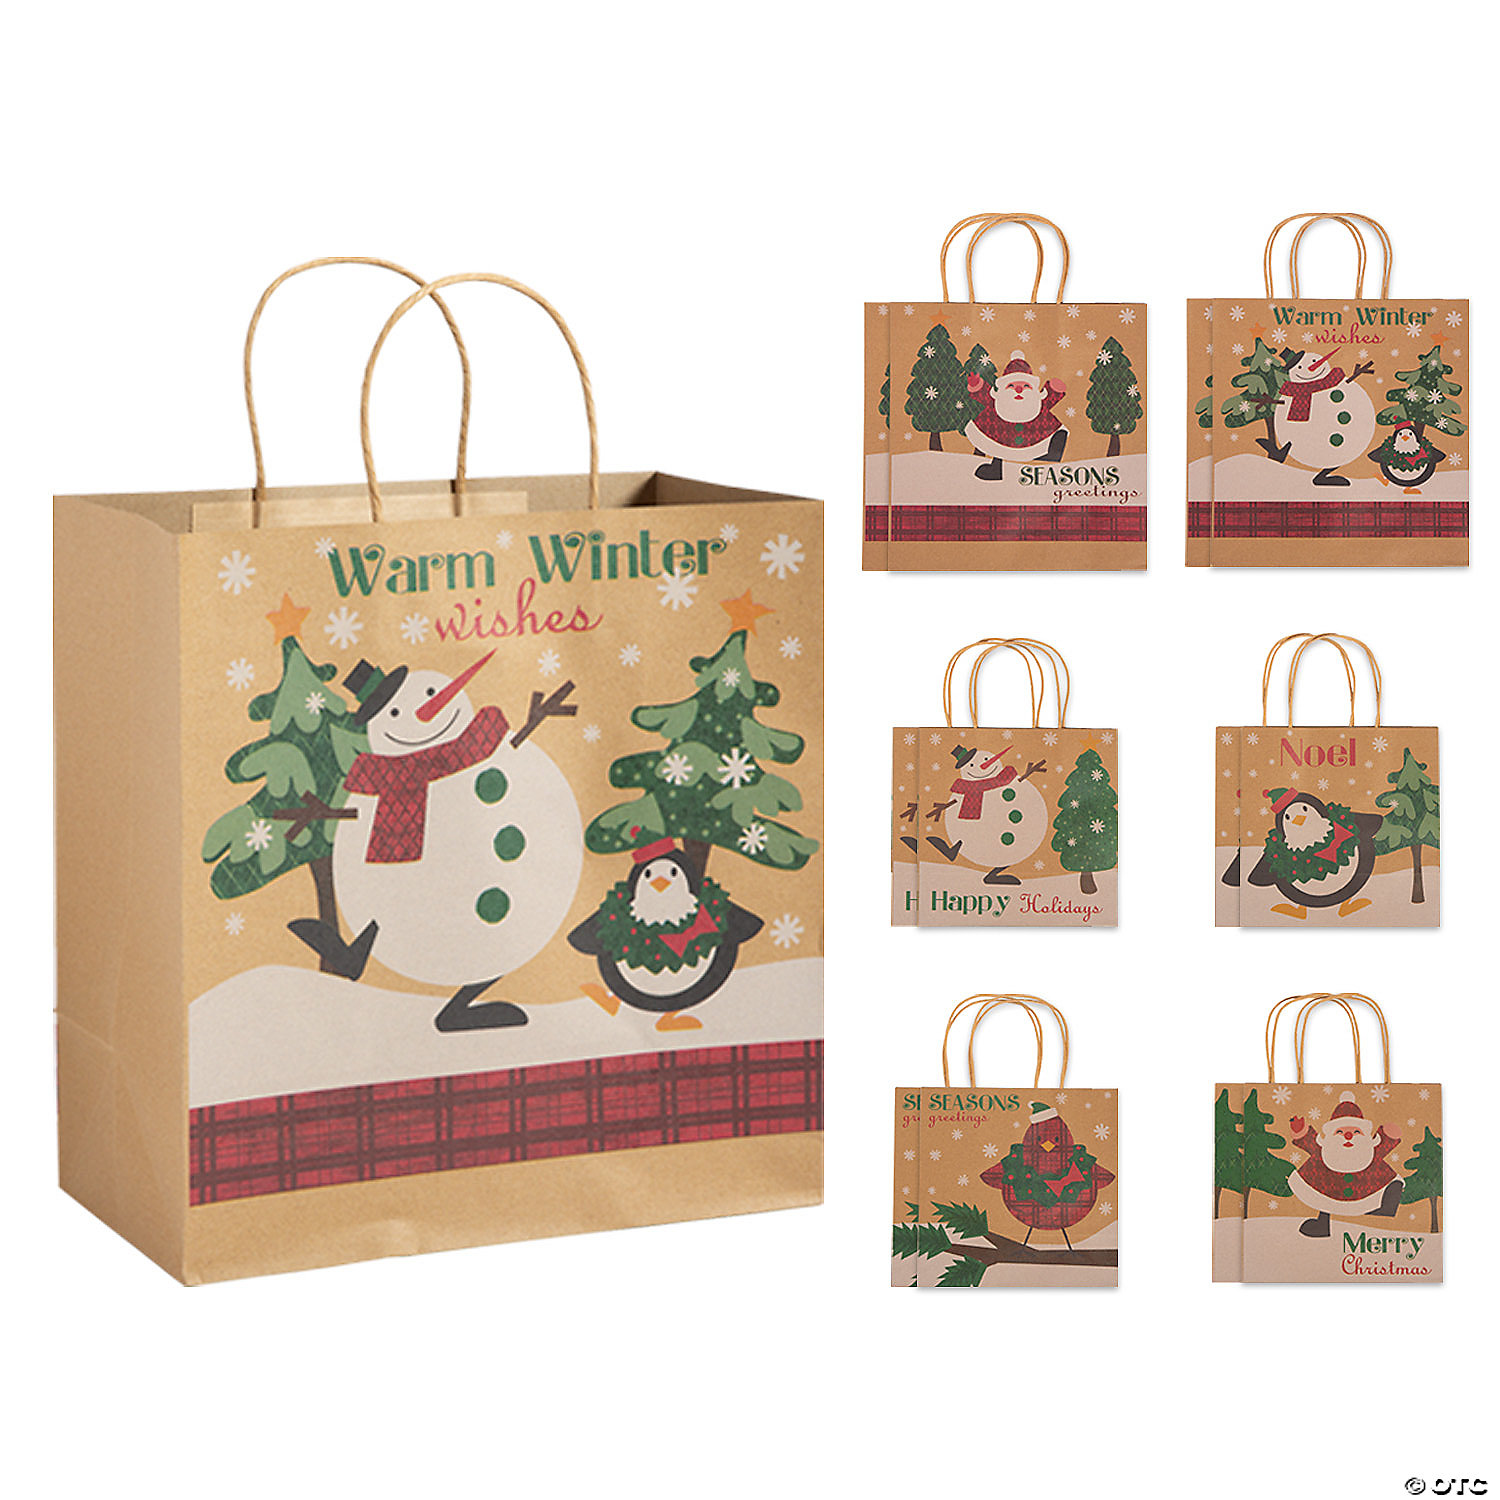 2 PACK CHRISTMAS MEDIUM GIFT BAGS WITH RED HANDLES WINTER SCENE & HOLLY WREATH